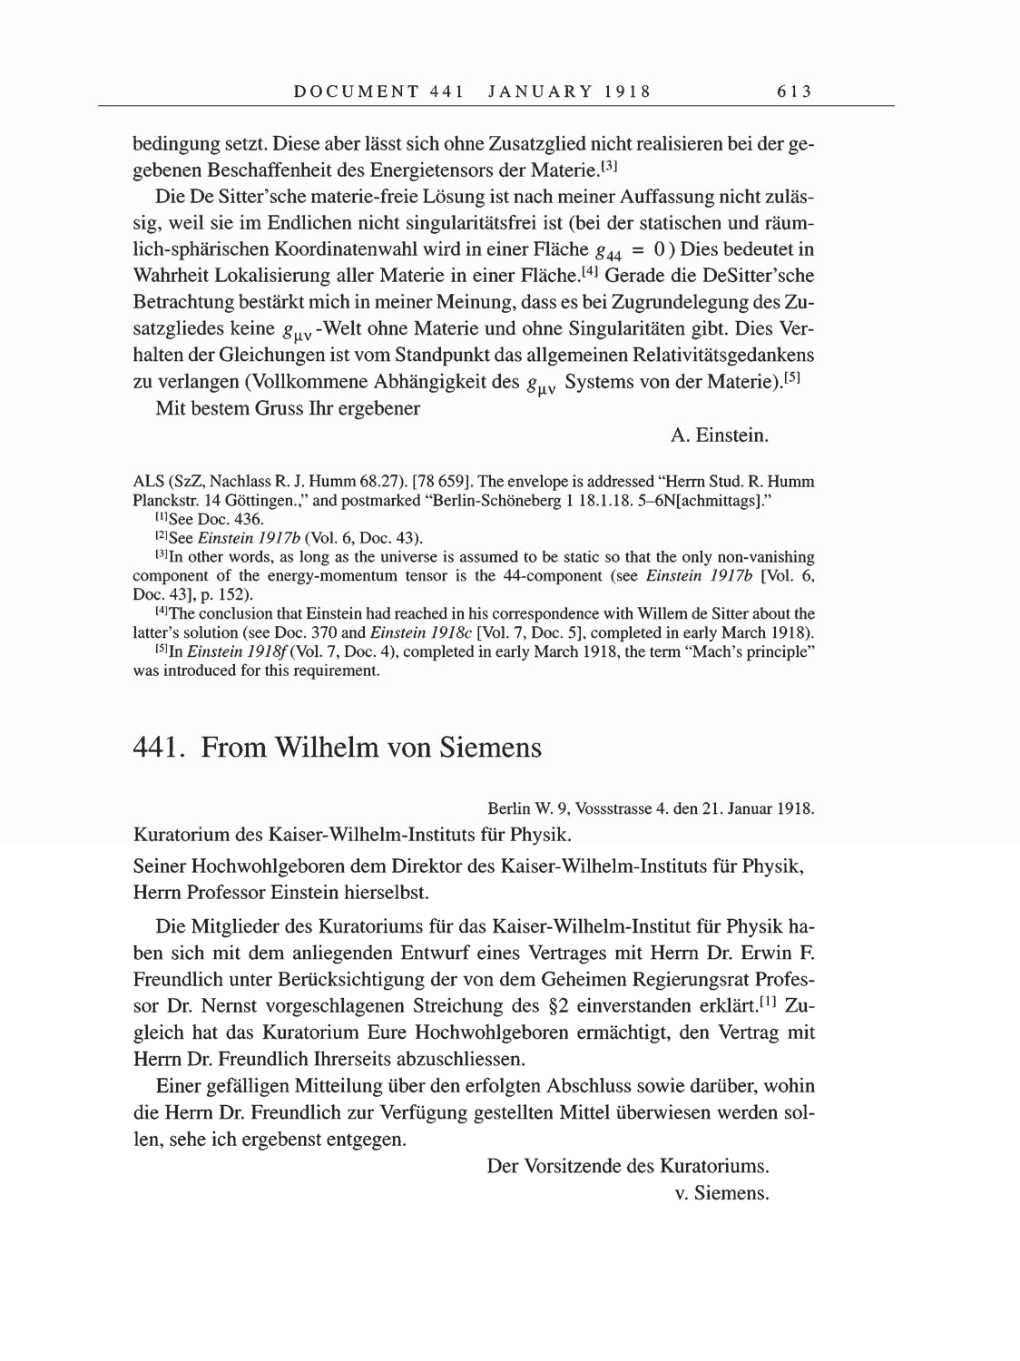 Volume 8, Part B: The Berlin Years: Correspondence 1918 page 613